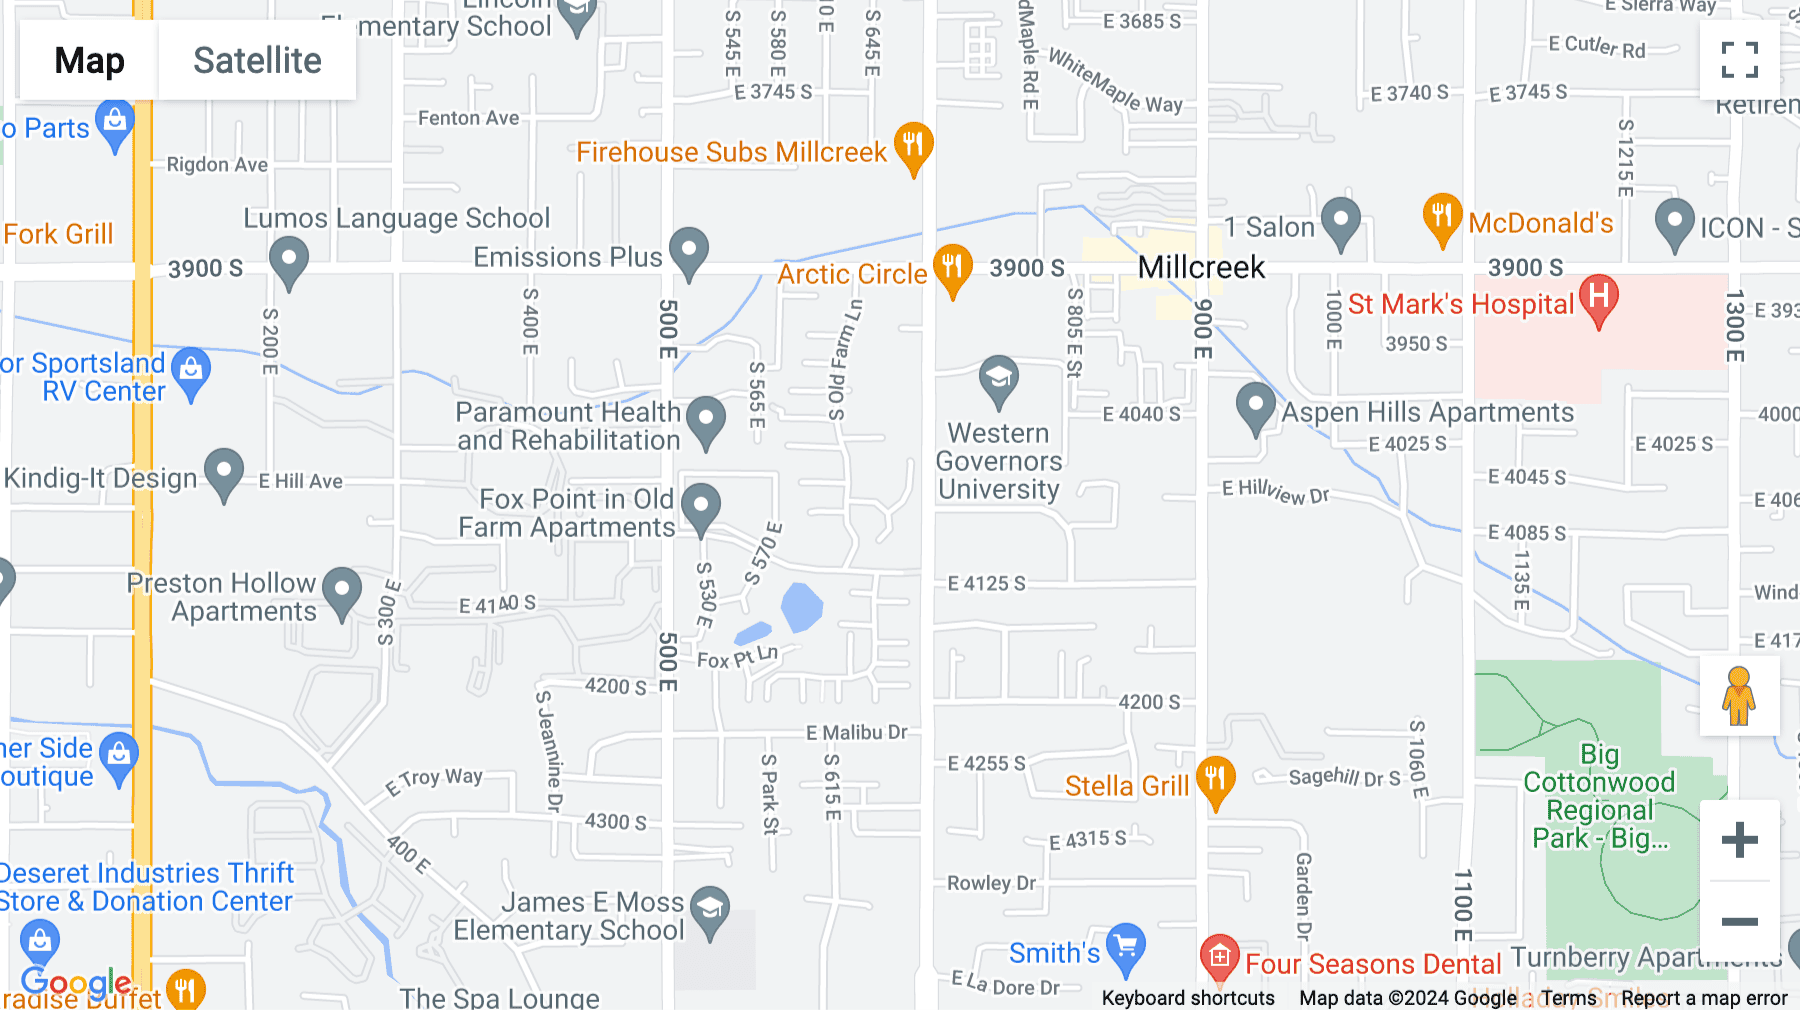 Click for interative map of 4001 South 700 East, The Woodlands Center, Suite 500, Salt Lake City